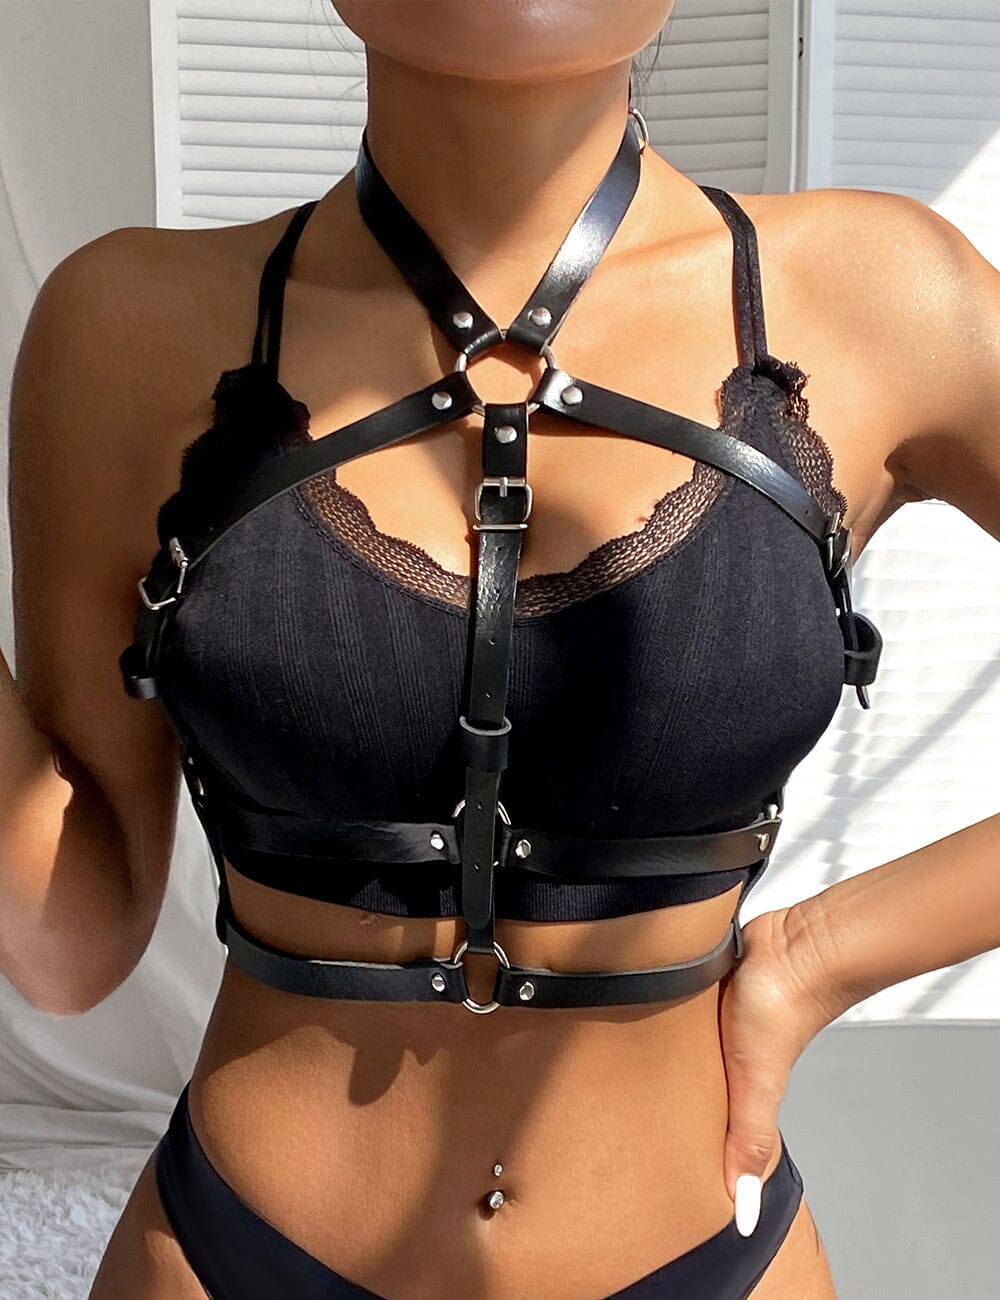 a woman wearing a black bra and harness